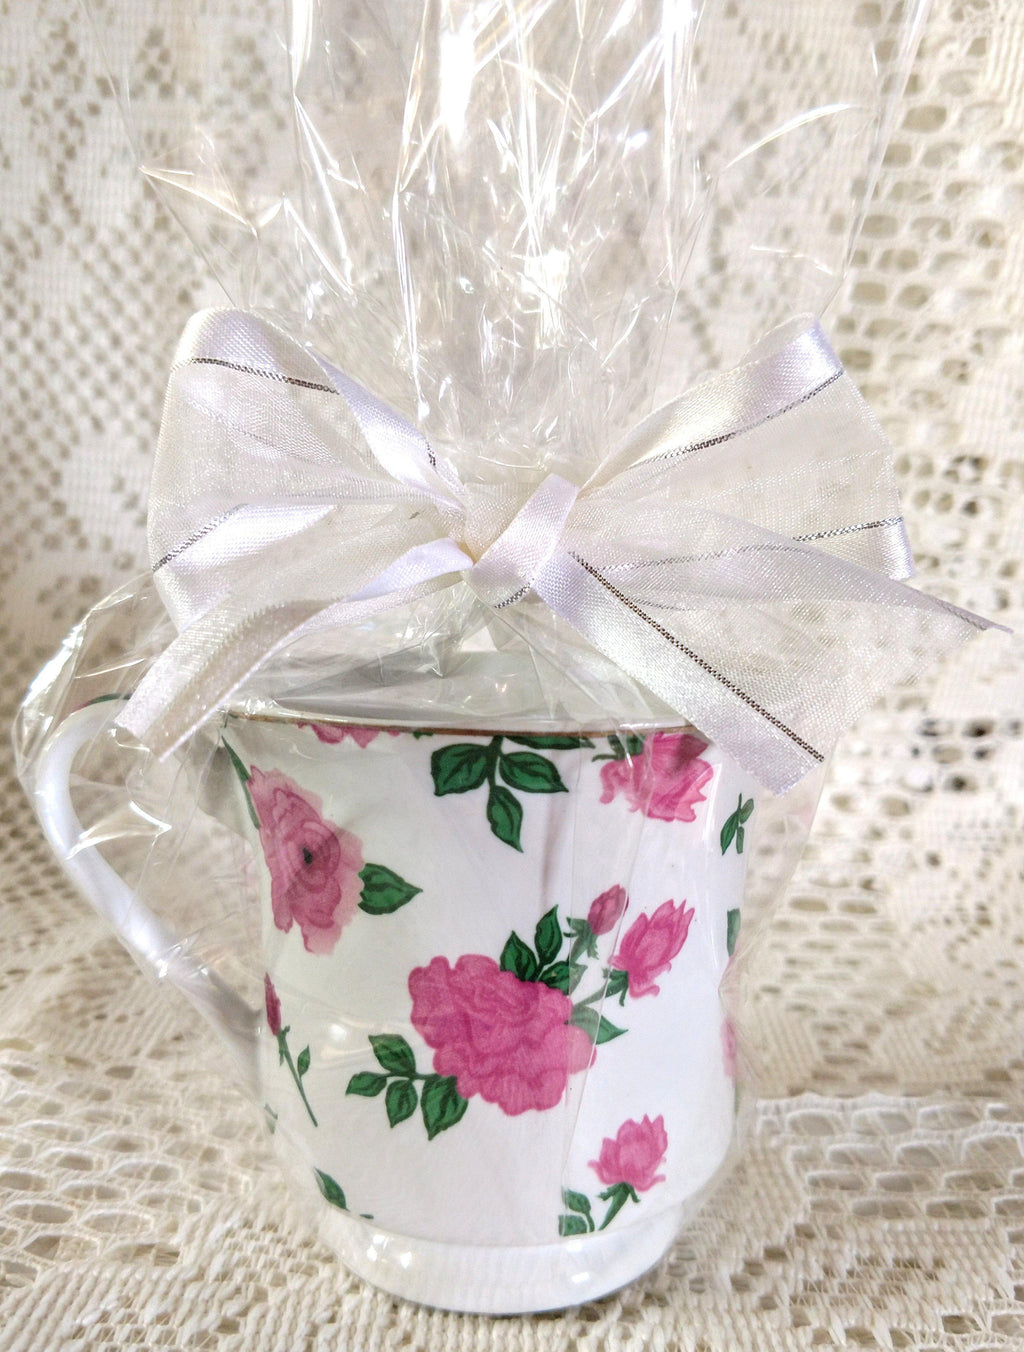 Coming Up Roses Tea Party Teacup Favor Set of 2